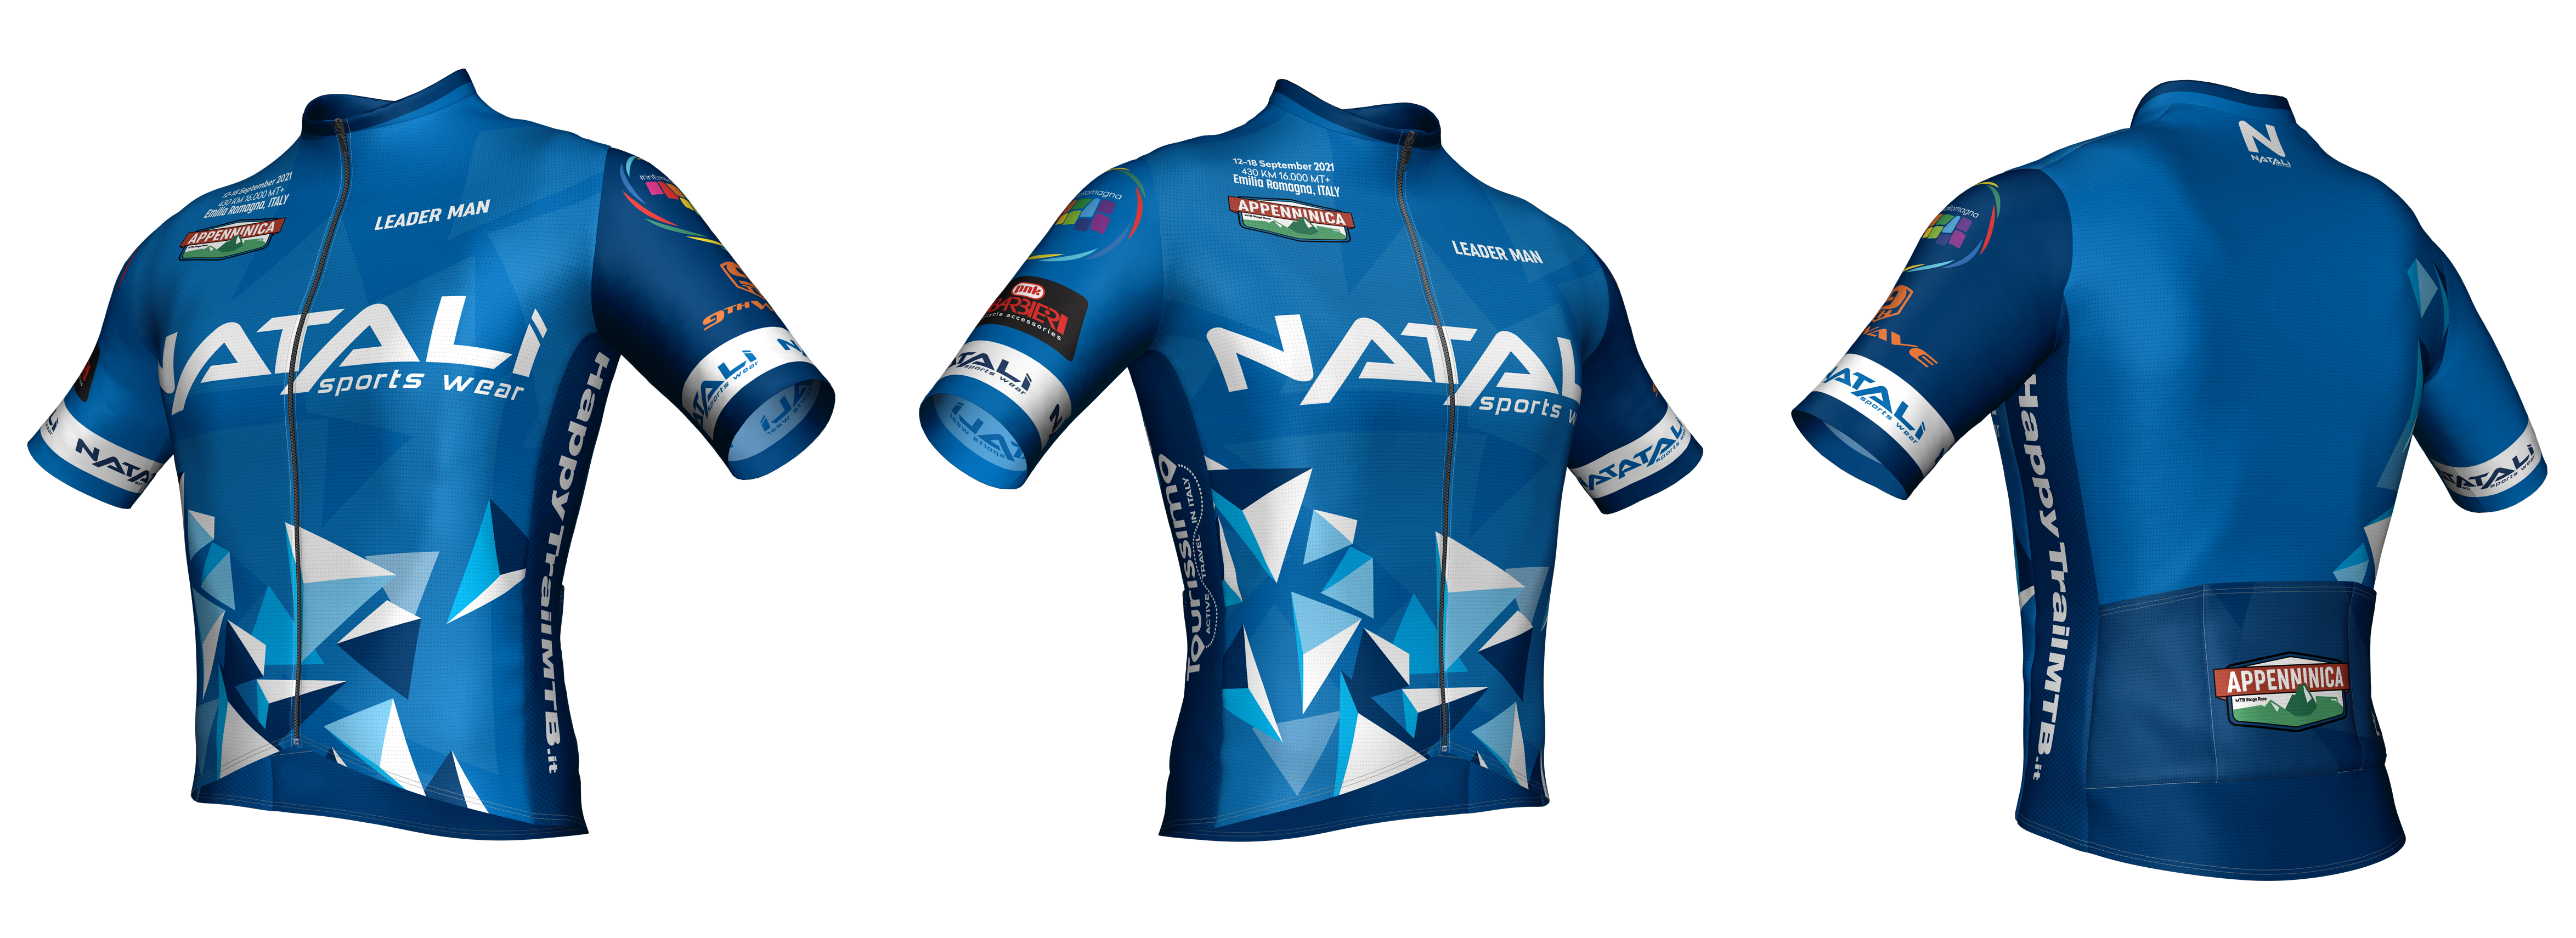 Natali crafts Appenninica’s leaders jerseys